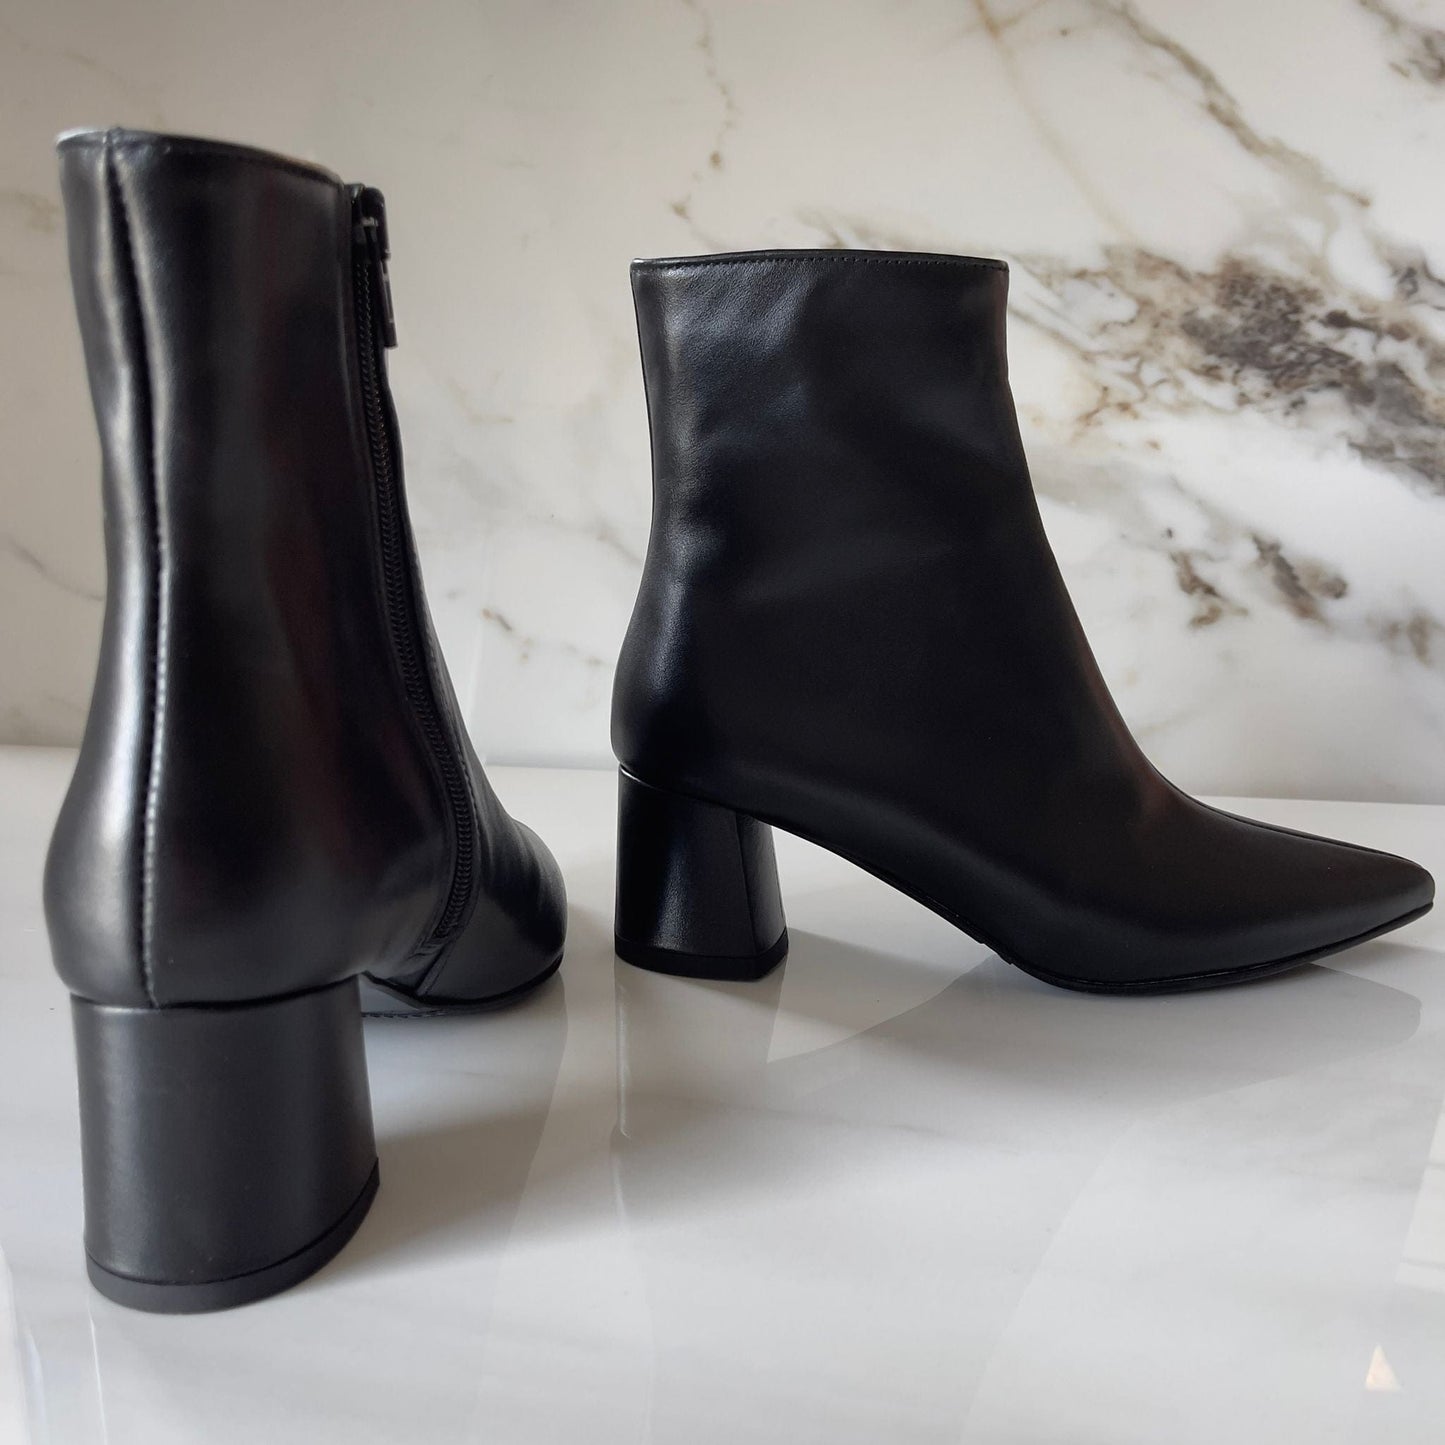 Pointed toe block heel ankle boots in black leather